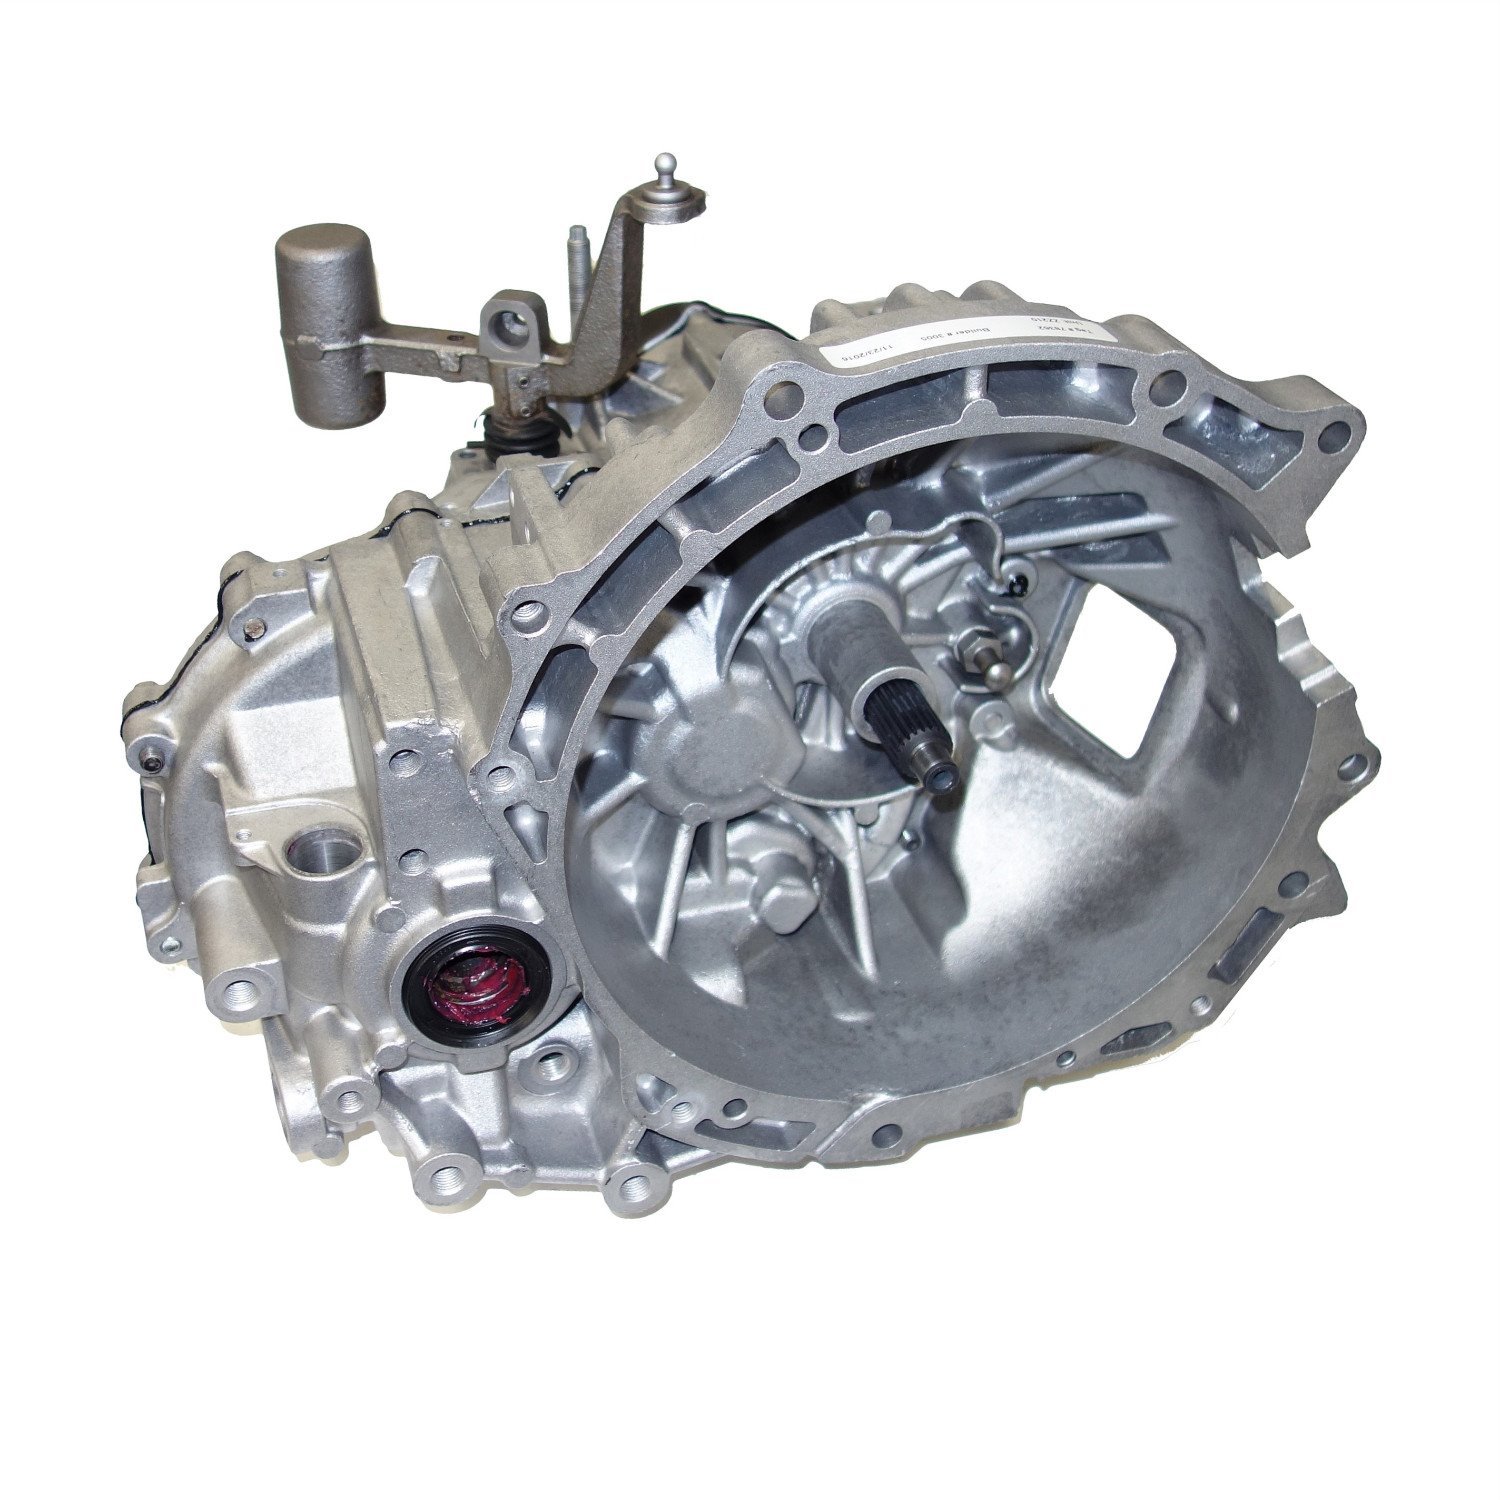 Remanufactured G35M-R M/T, 2004-06 Mazda 3 5 Speed, With ABS